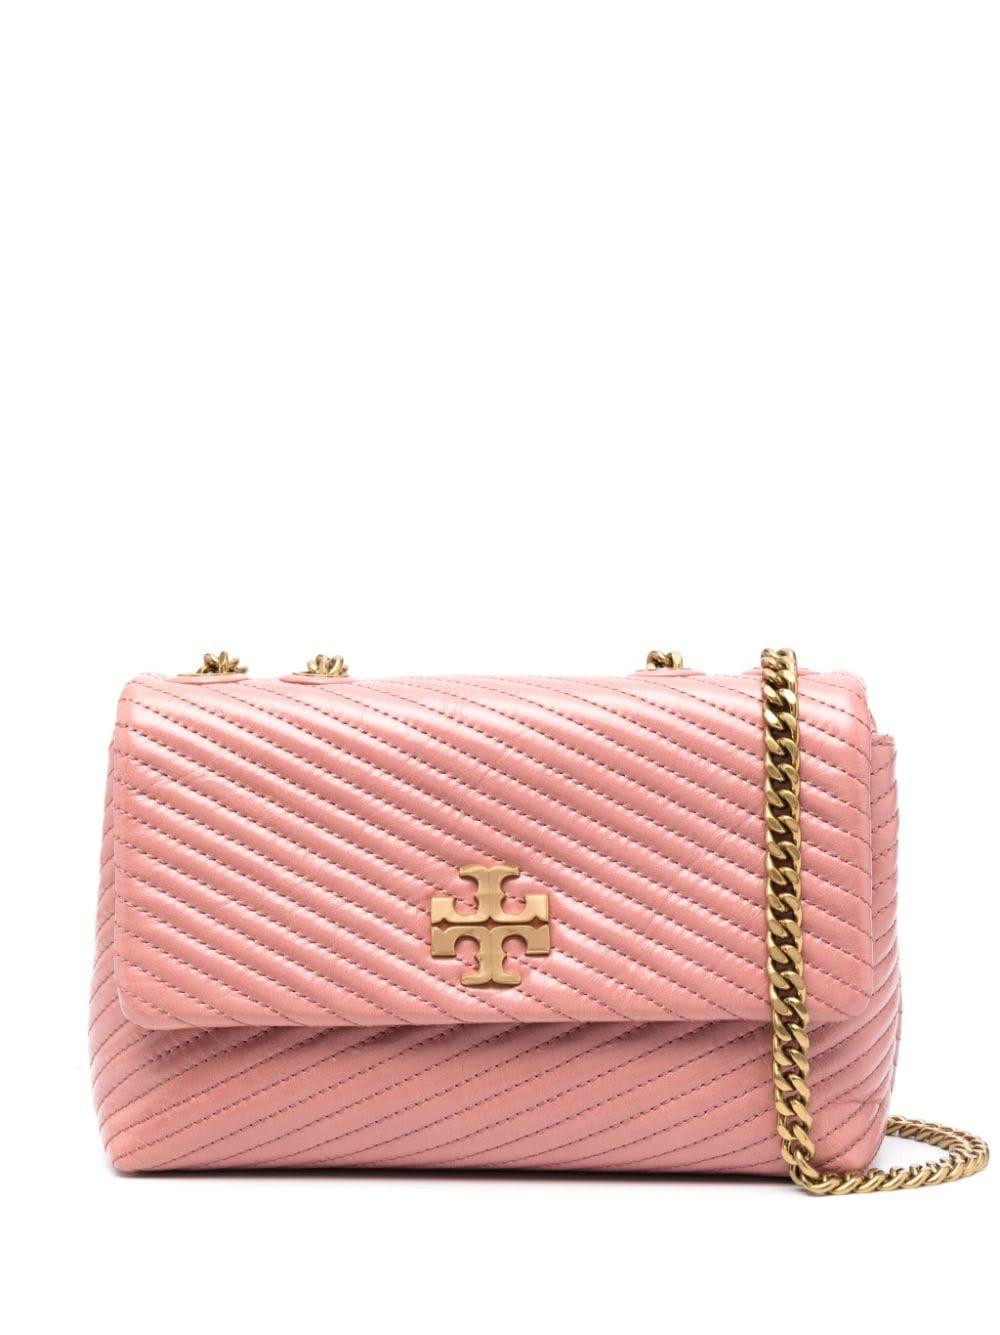 Cross body bags Tory Burch - Fleming pink quilted leather cross